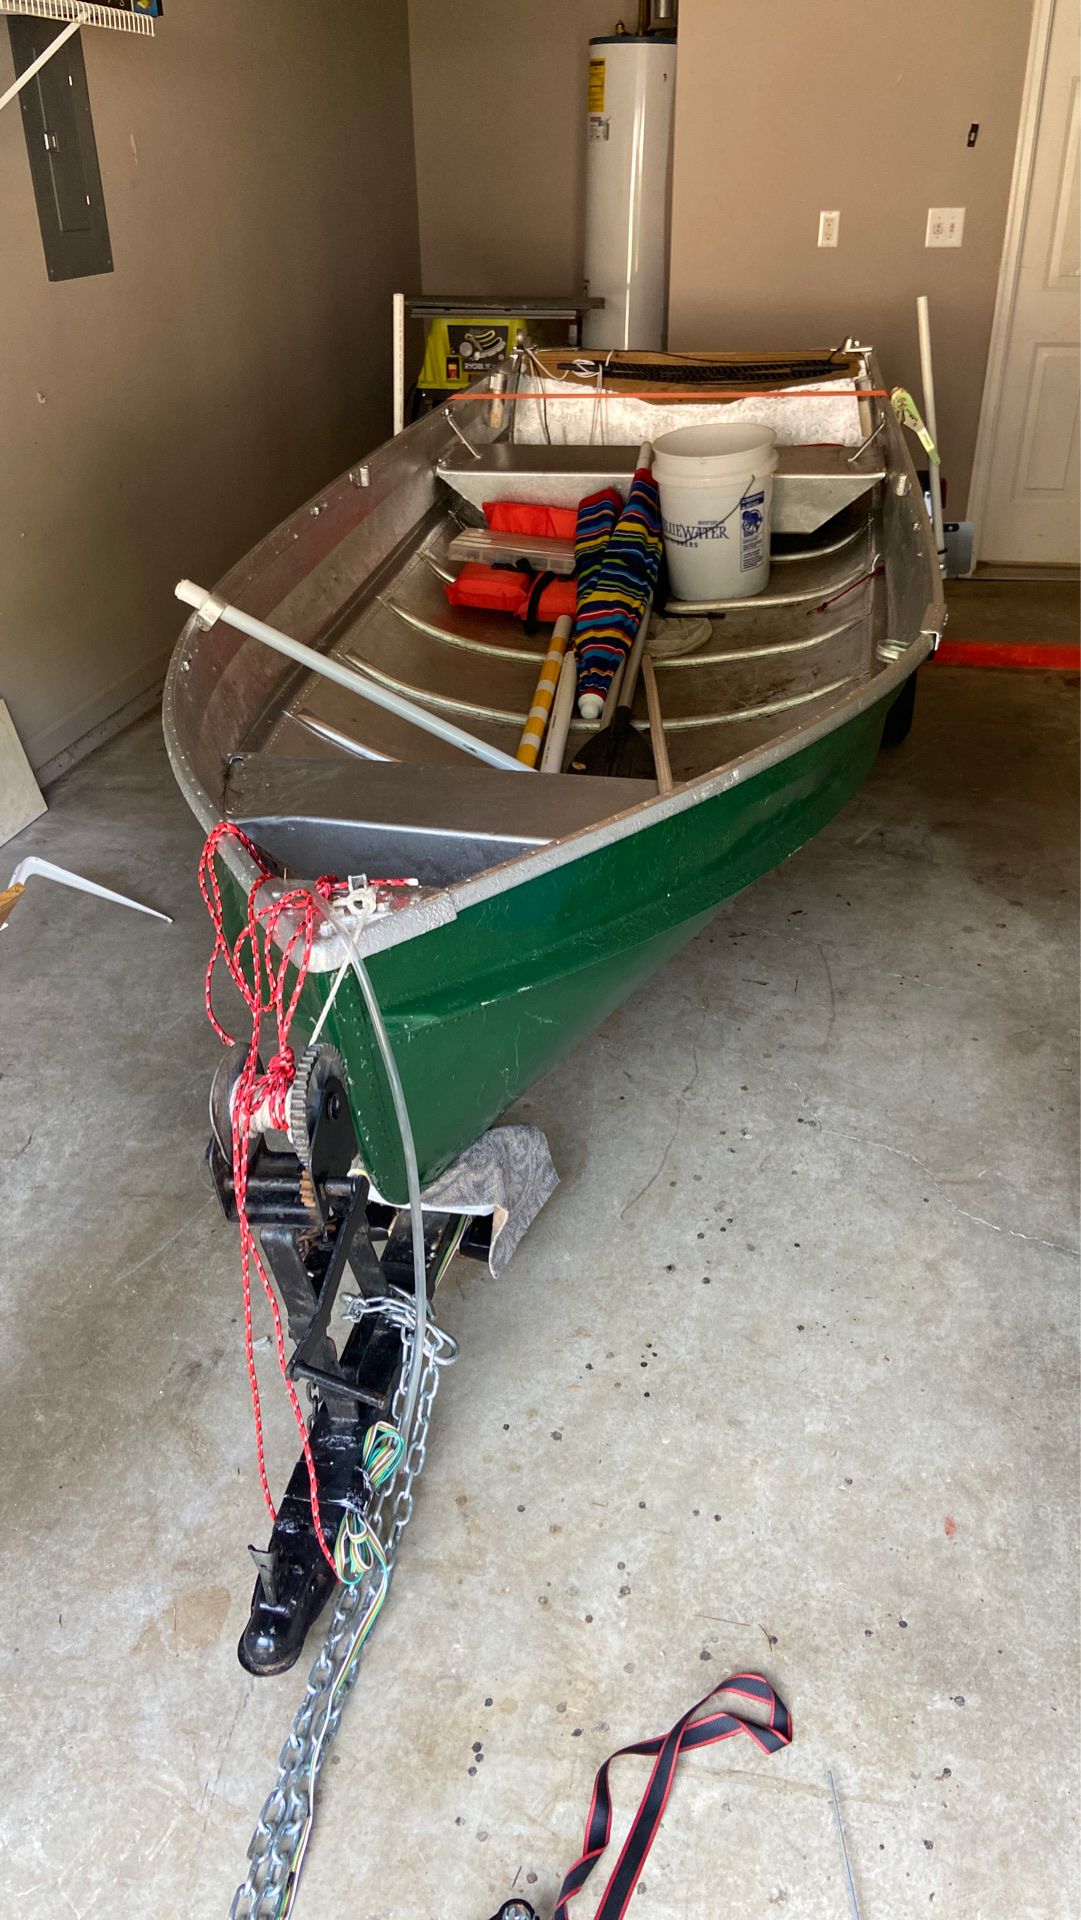 12’ fishing boat AND trailer!